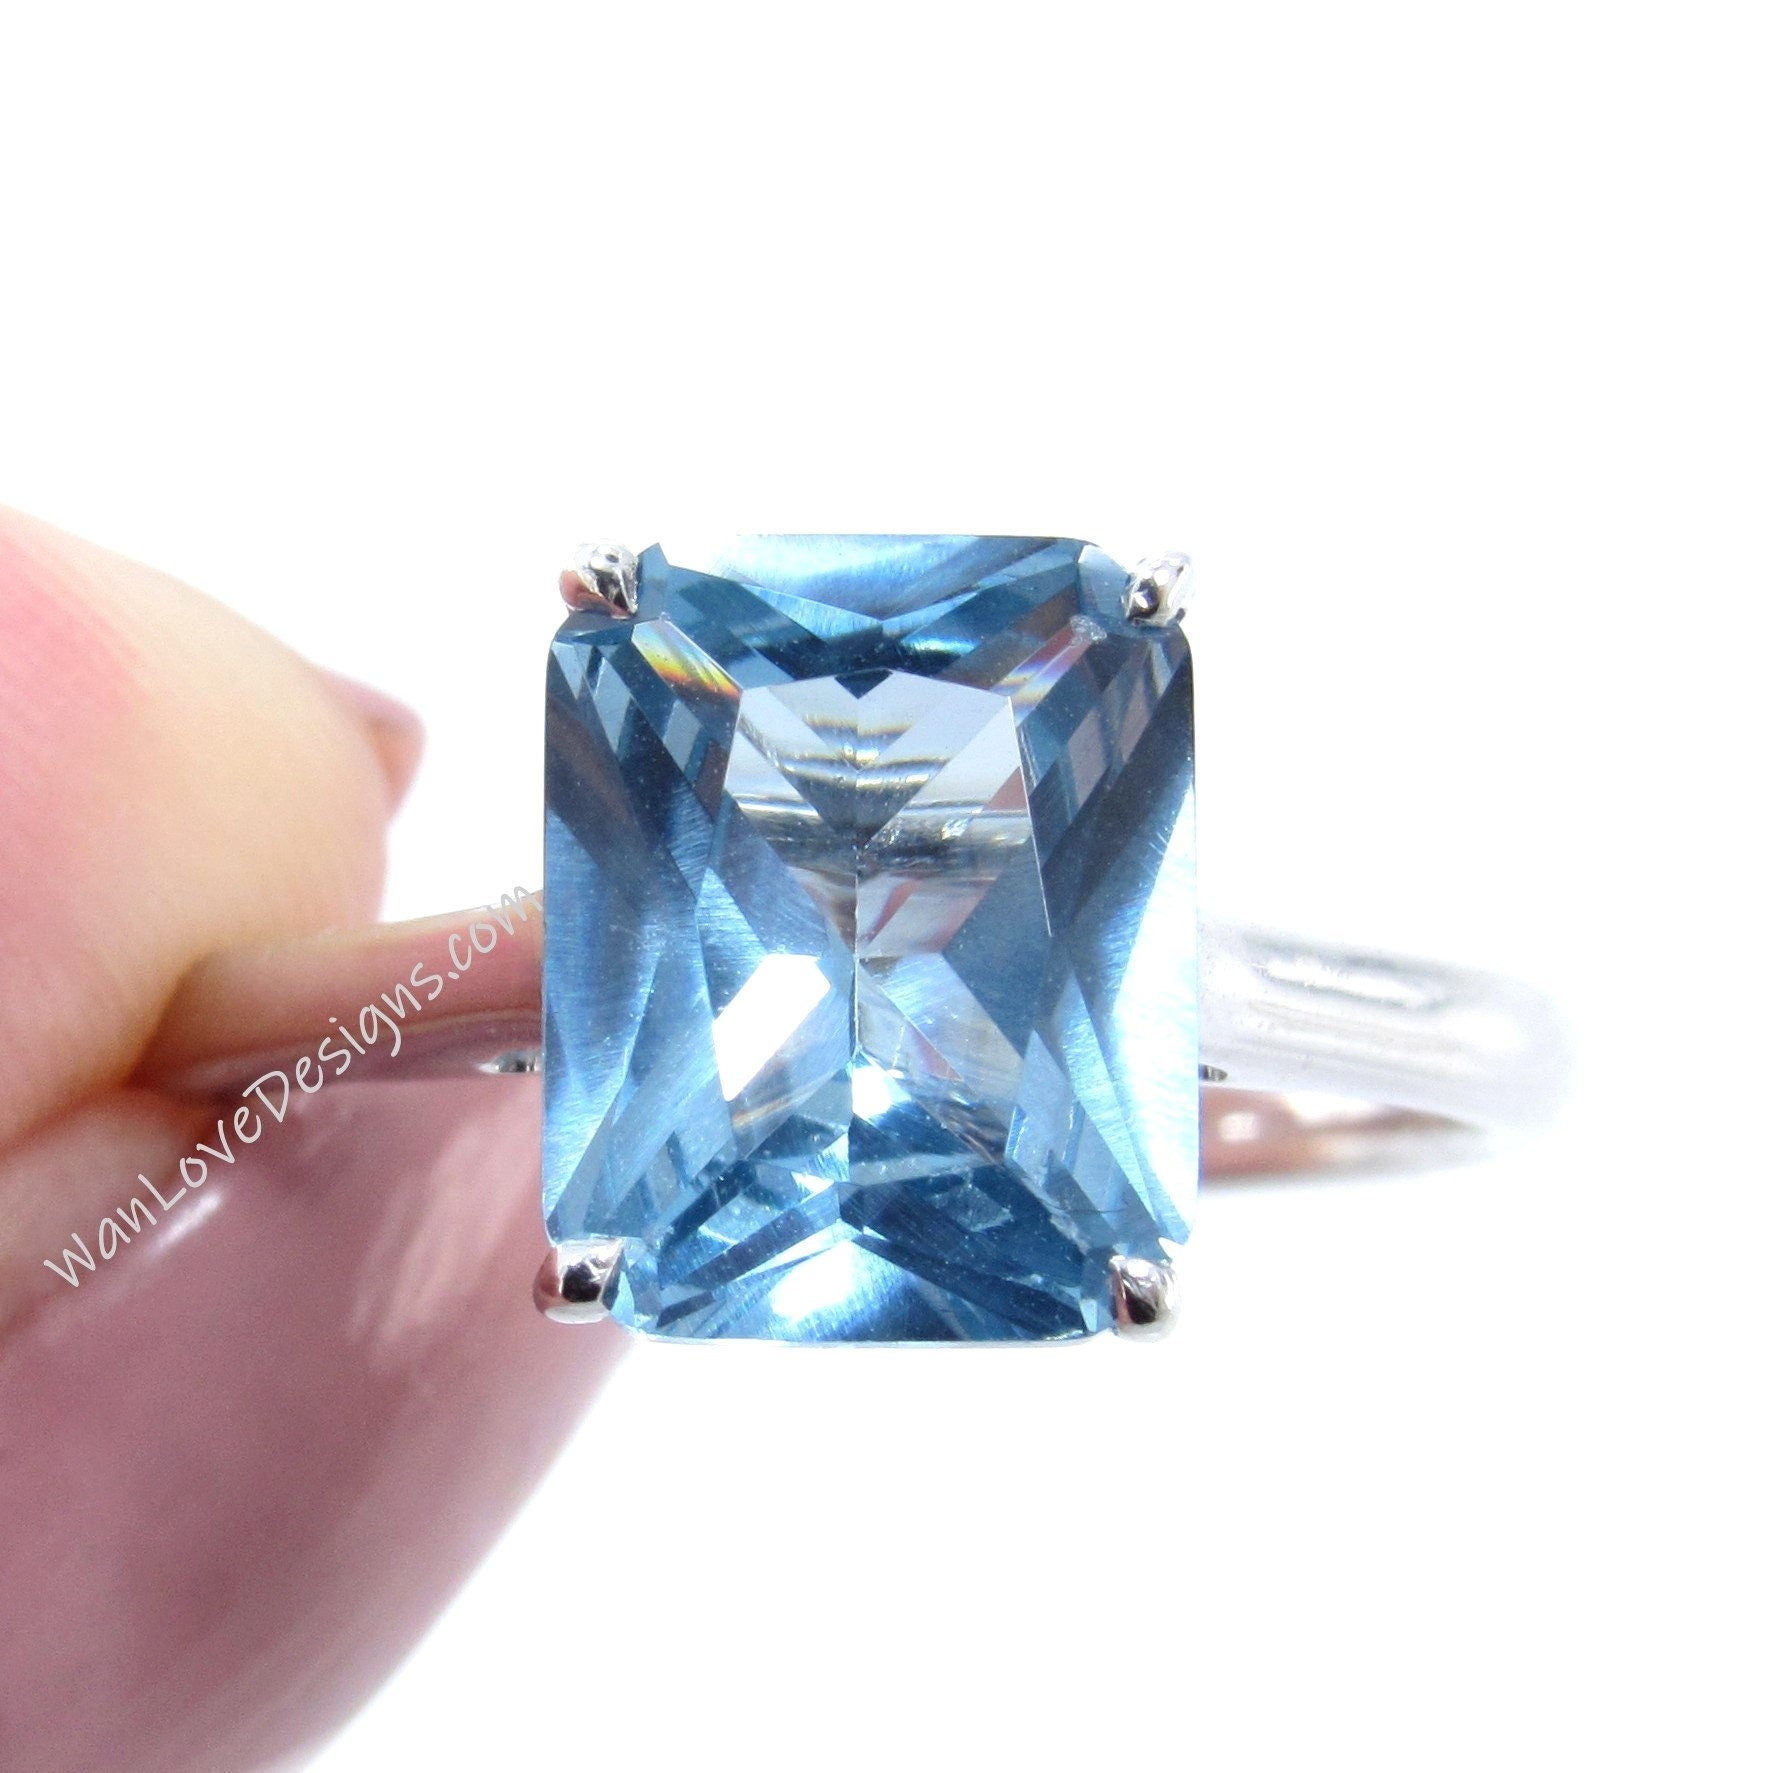 Aquamarine Light Blue Spinel Emerald cut Engagement Ring Solitaire Radiant 4ct 10x8mm promise bridal wedding Anniversary ring-Ready to ship Wan Love Designs